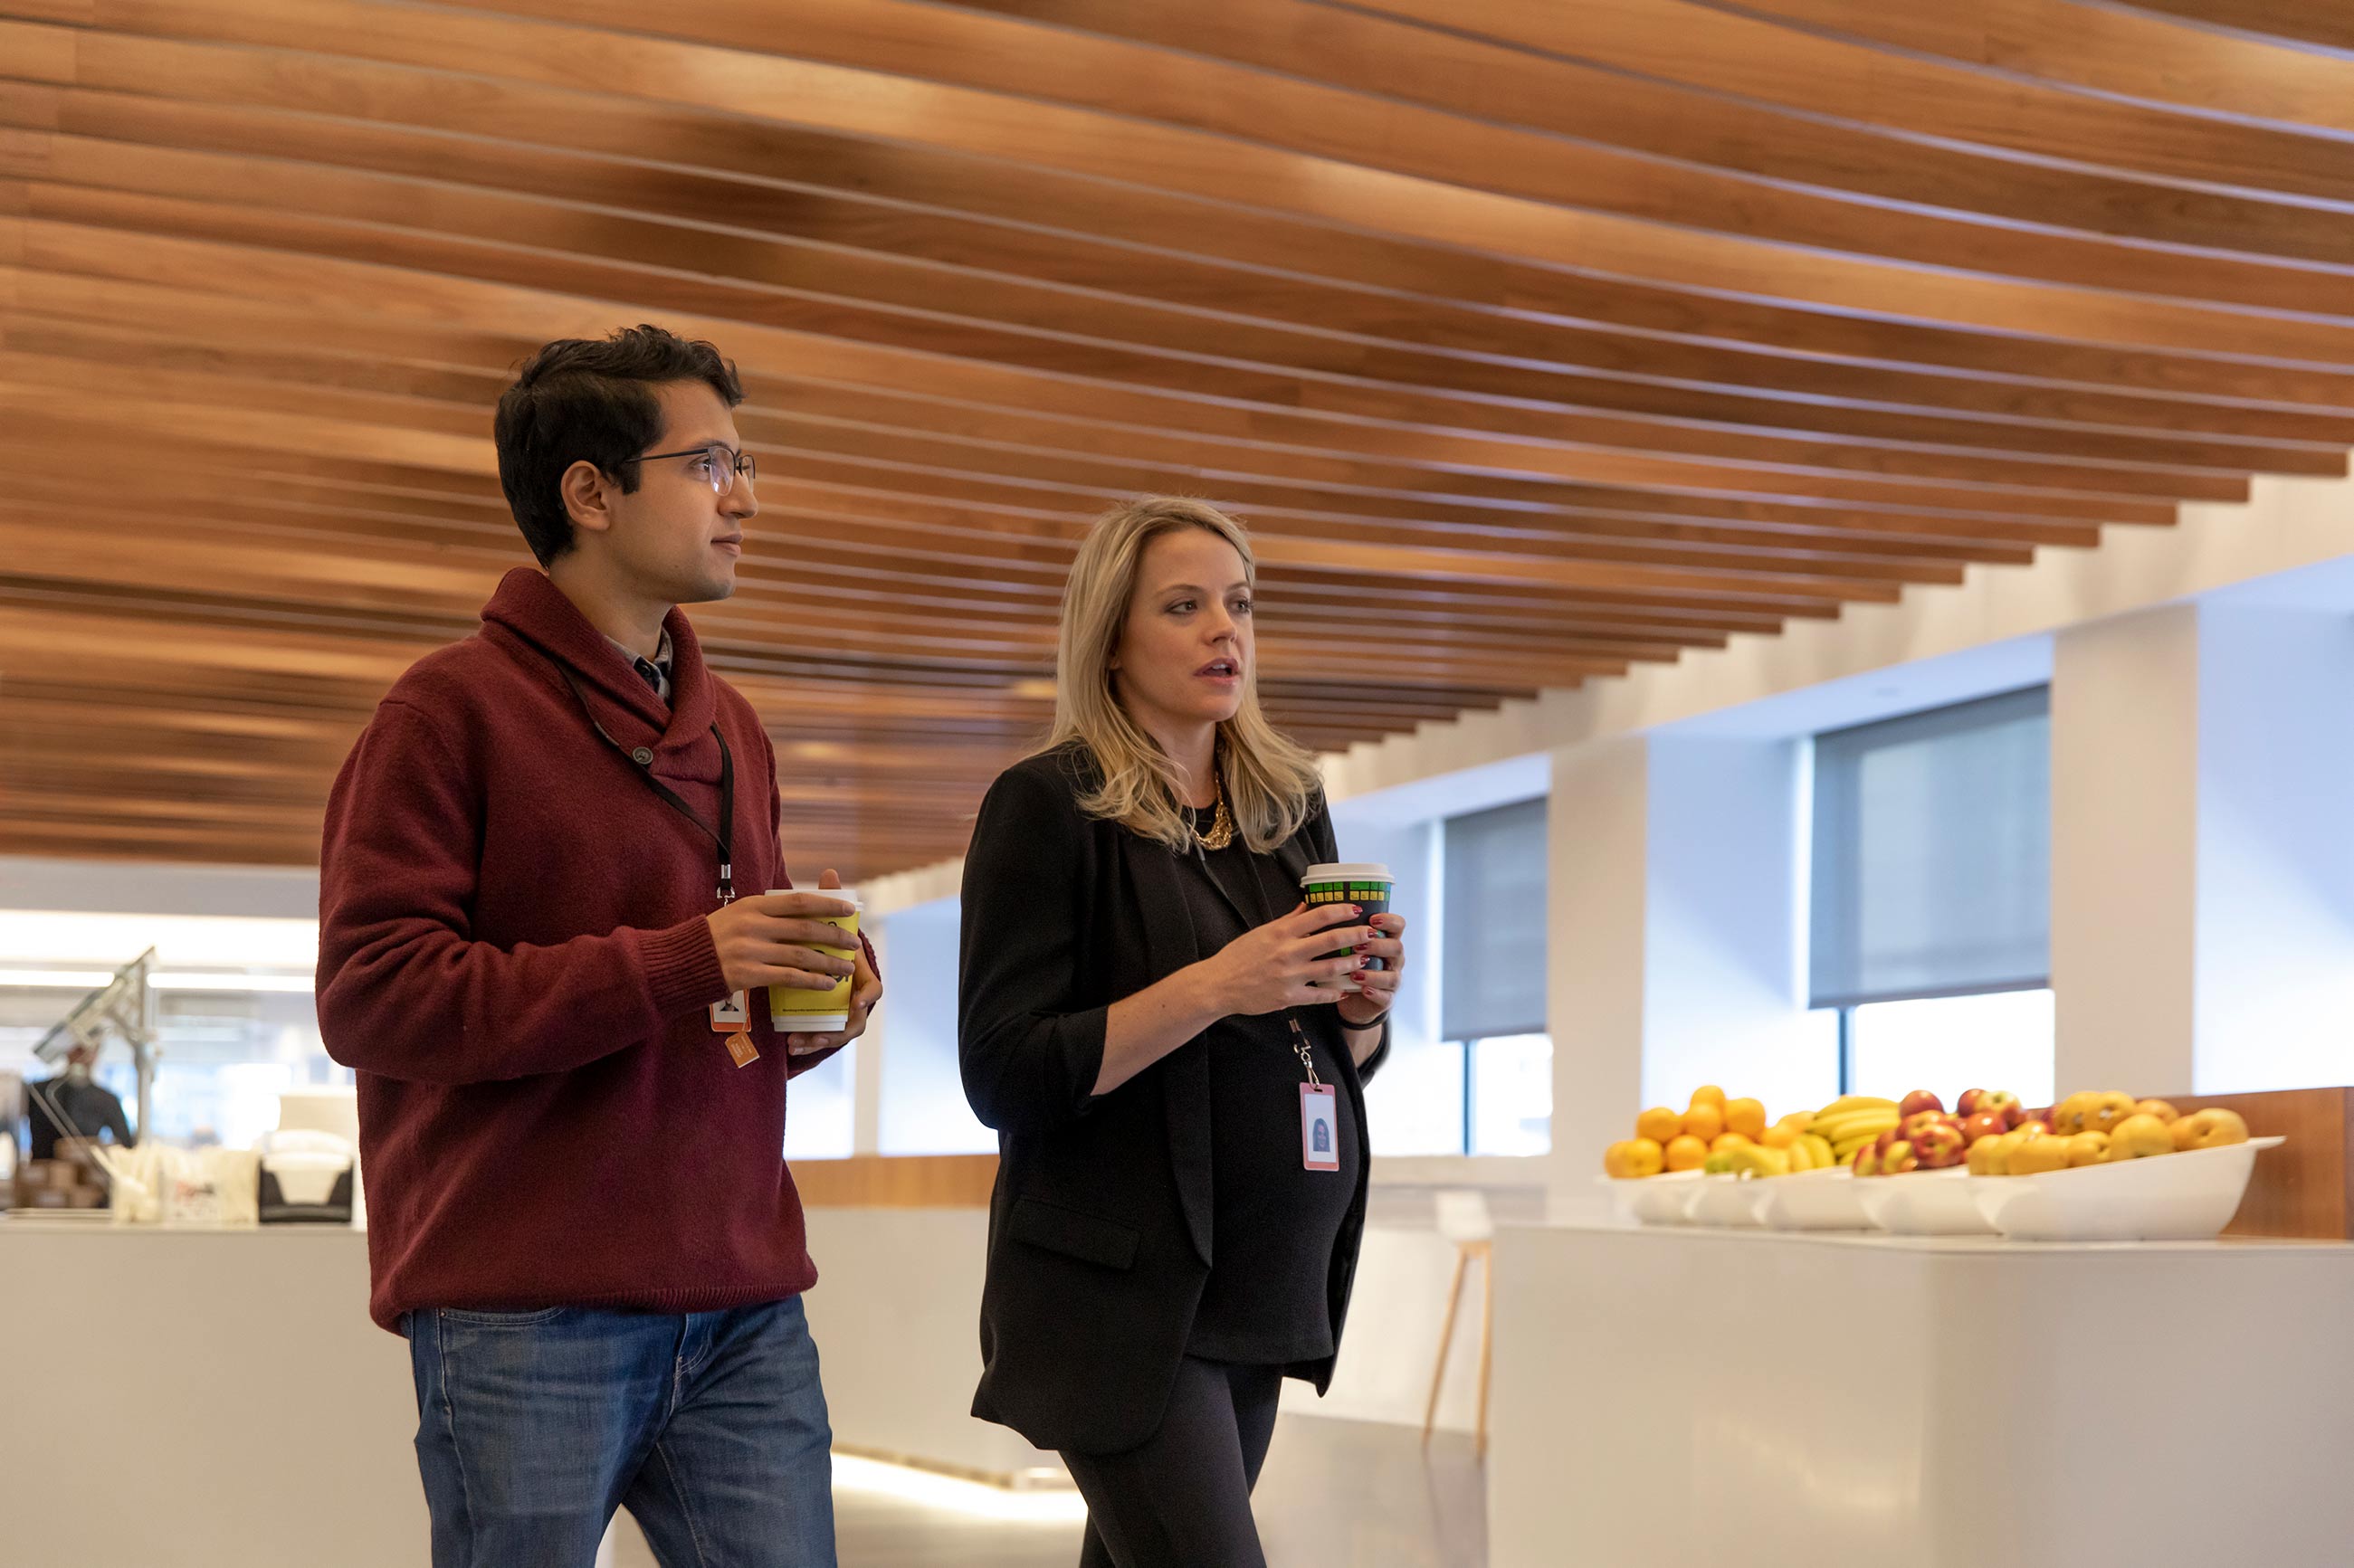 Two Bloomberg employees, one of them pregnant, discuss a project while walking through the office with warm drinks.